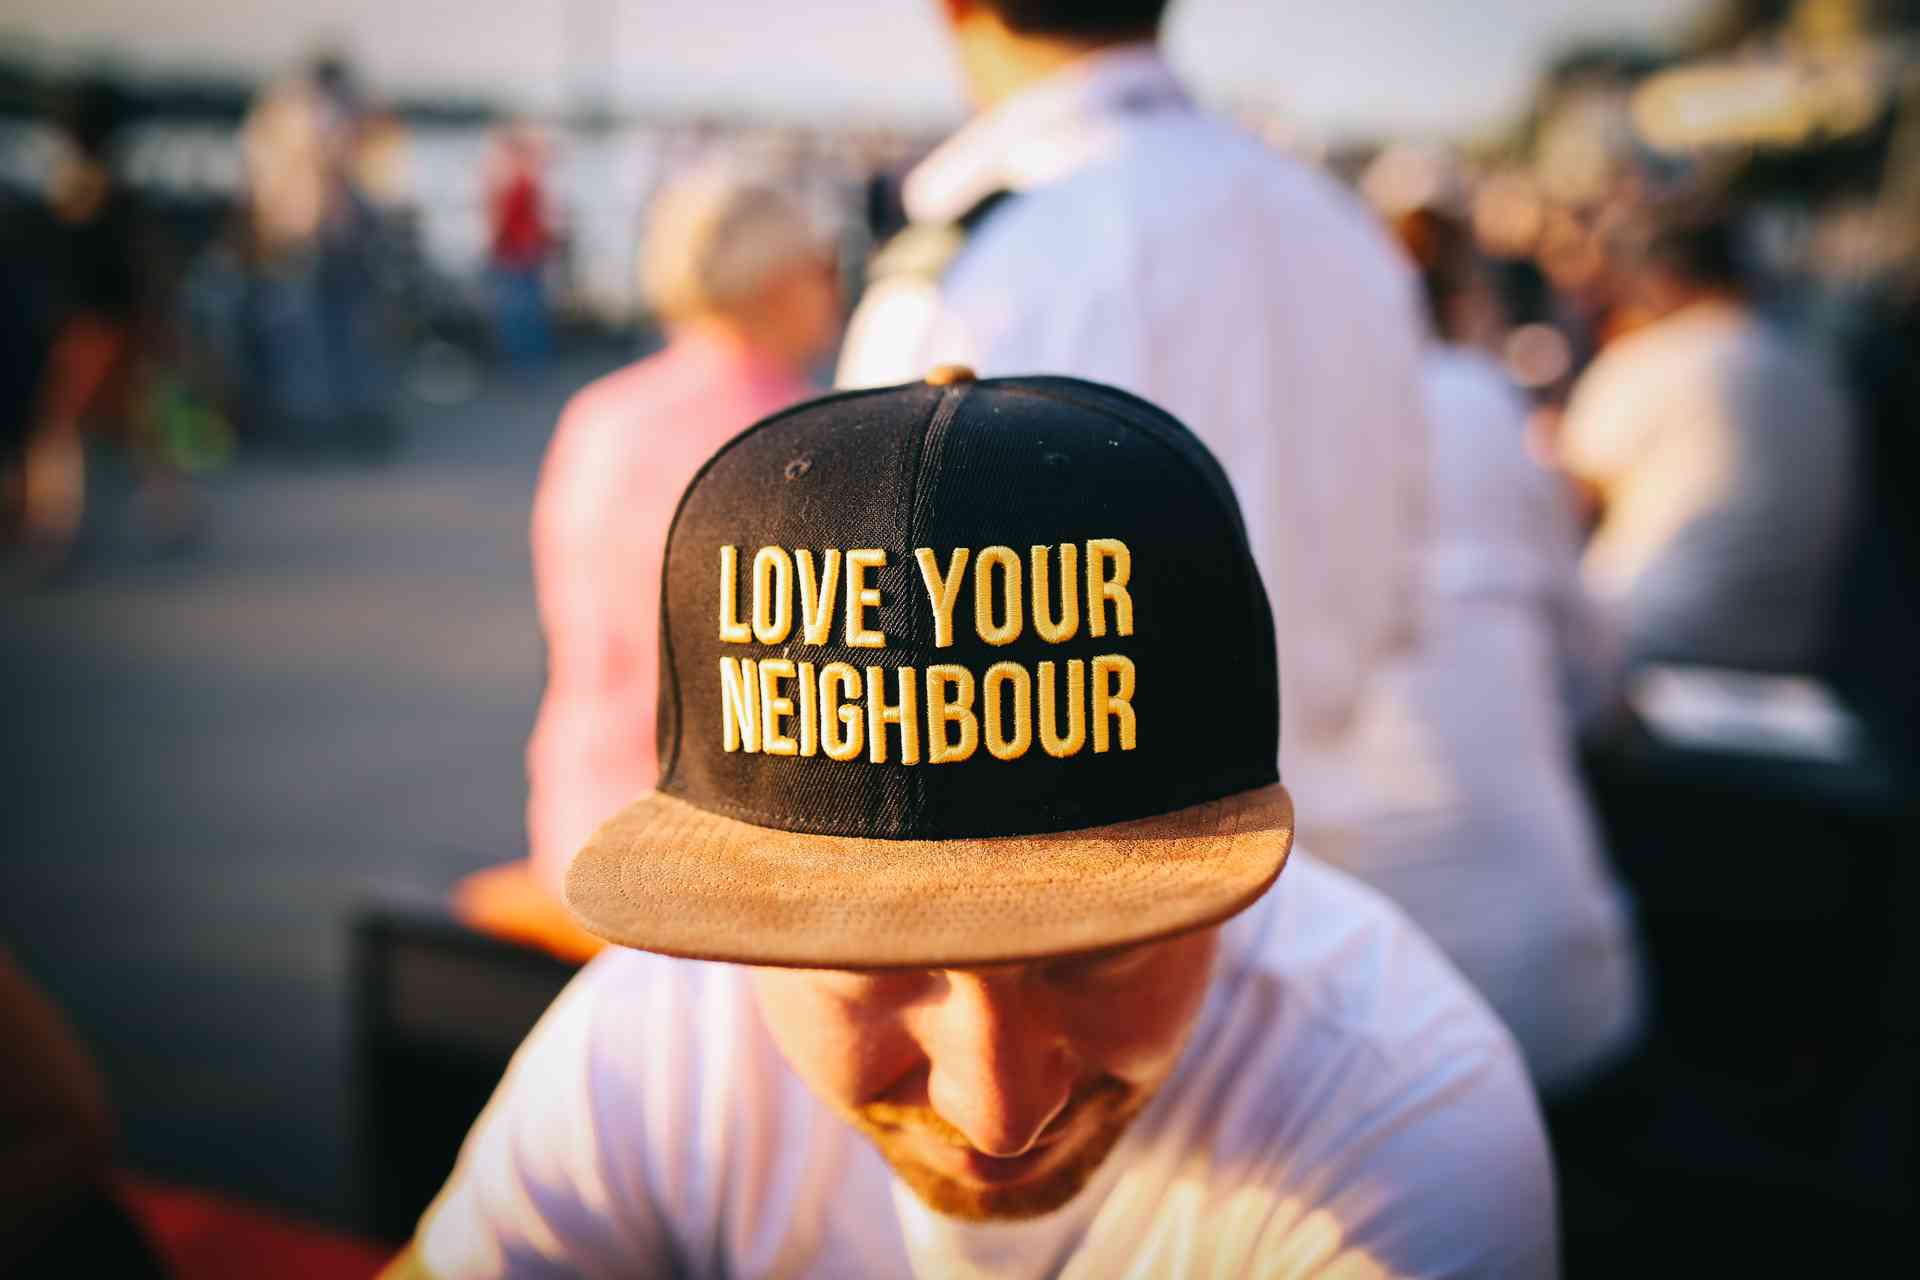 Photo of a man wearing a baseball cap, with the cap in focus and nearer the viewer. The cap has the words "Love your neighbour" on it. Photo by Nina Strehl on Unsplash